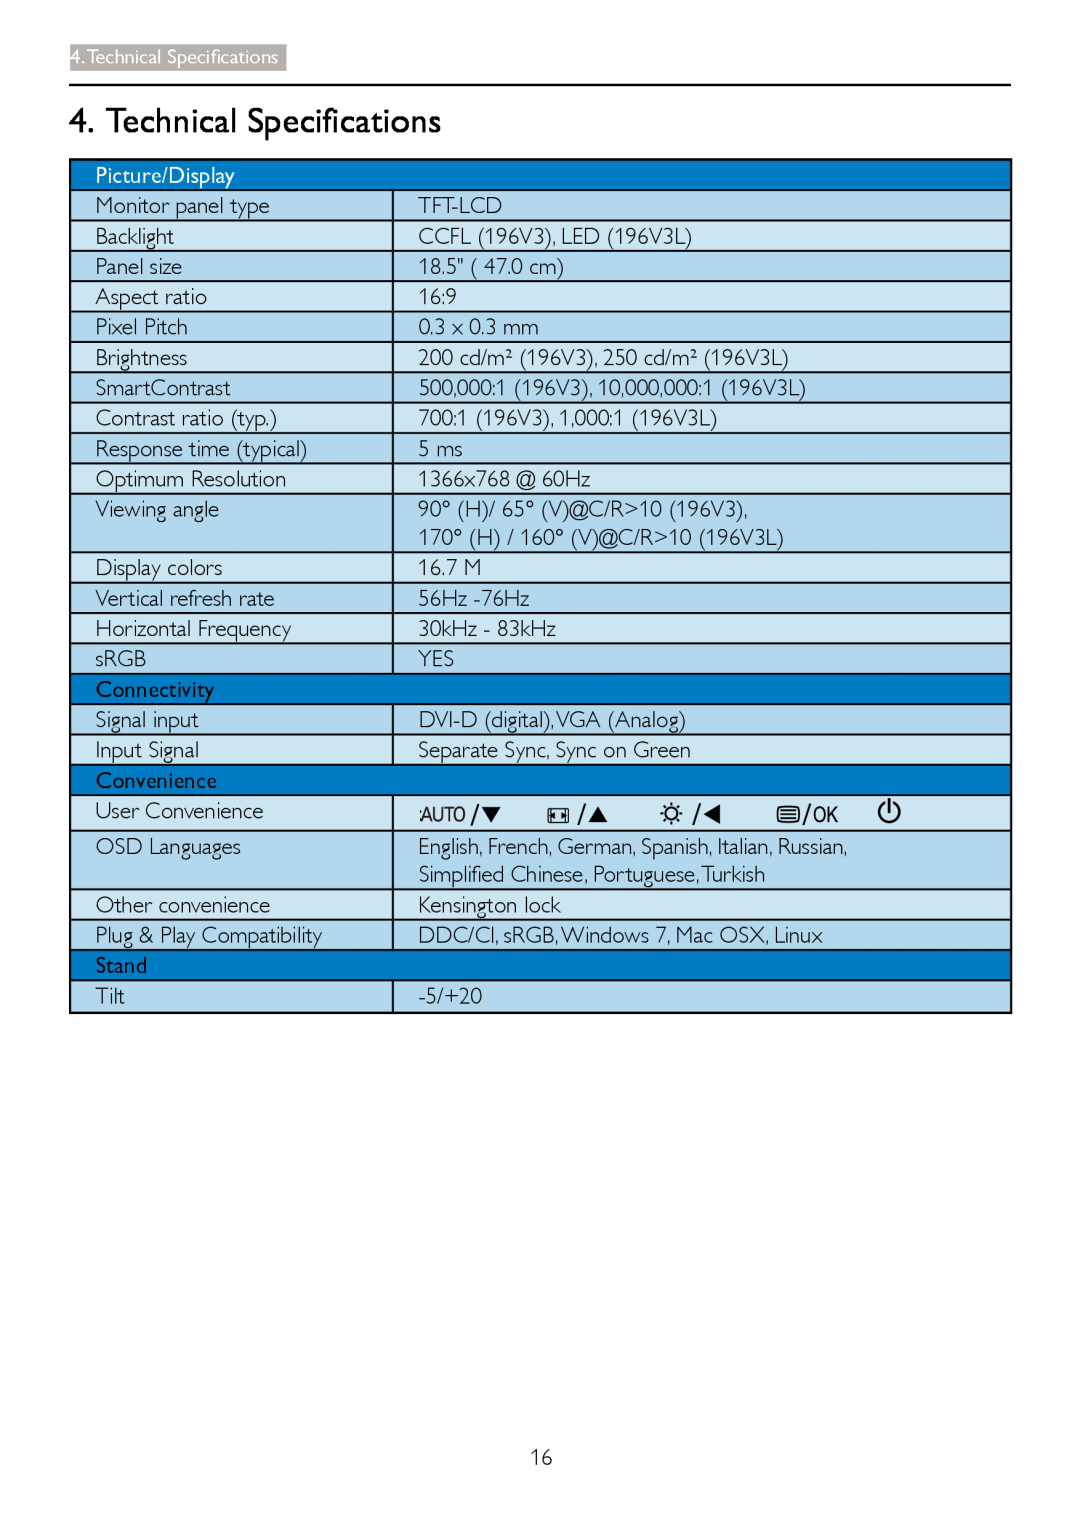 Philips 196V3 user manual Technical Specifications, Picture/Display 